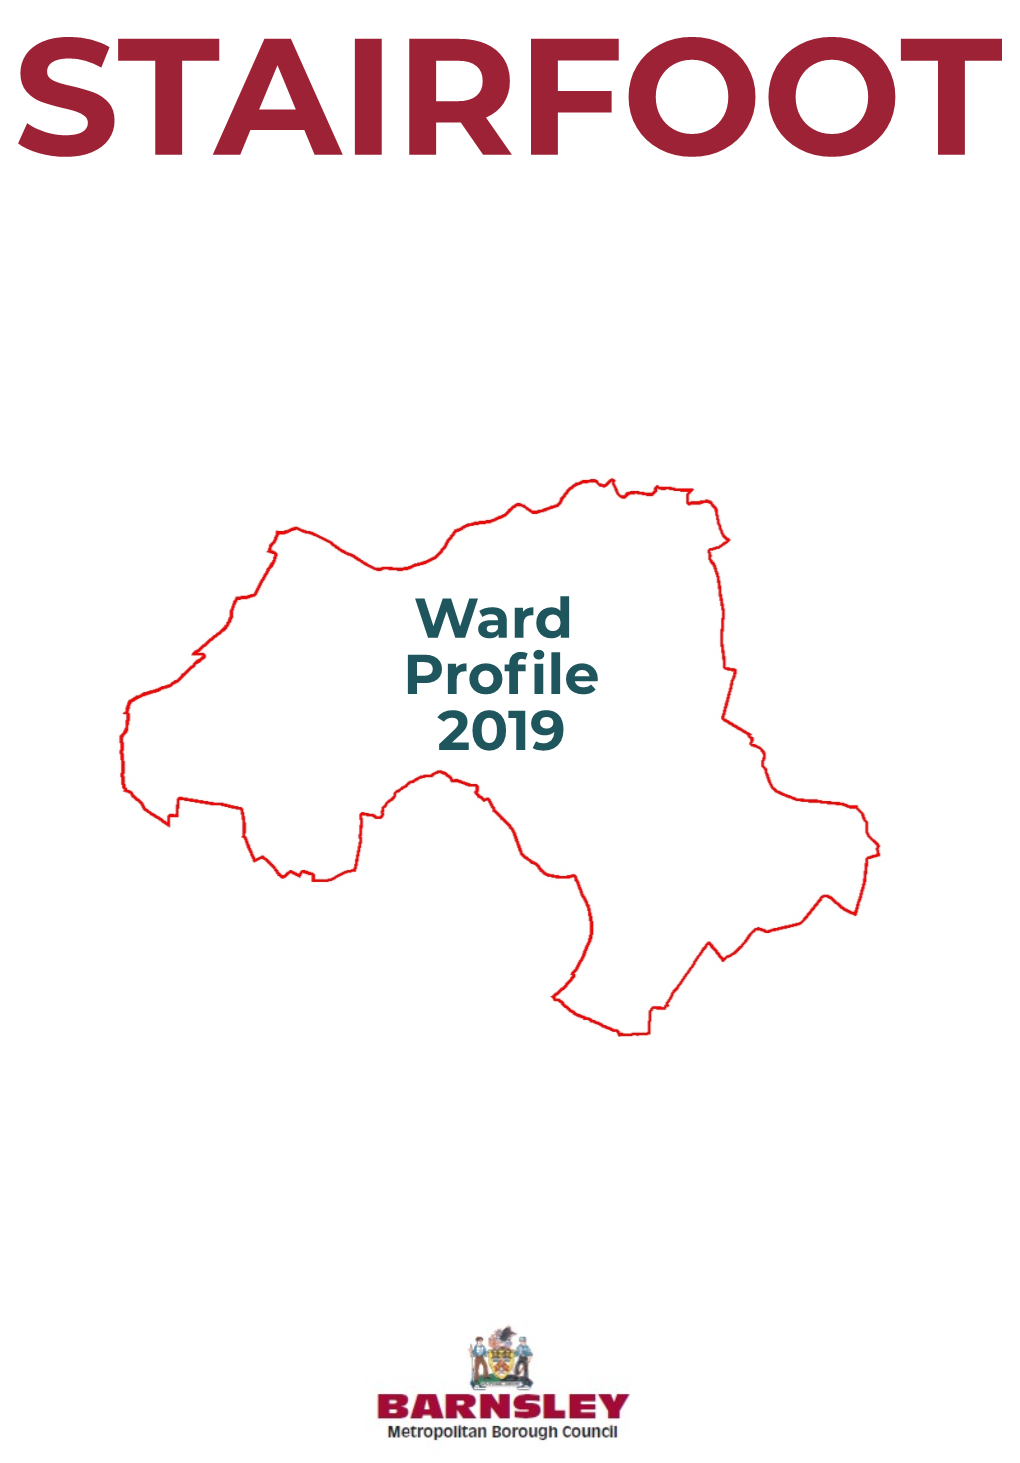 Stairfoot Ward Achieving a Good Level of Development Increased in 2018